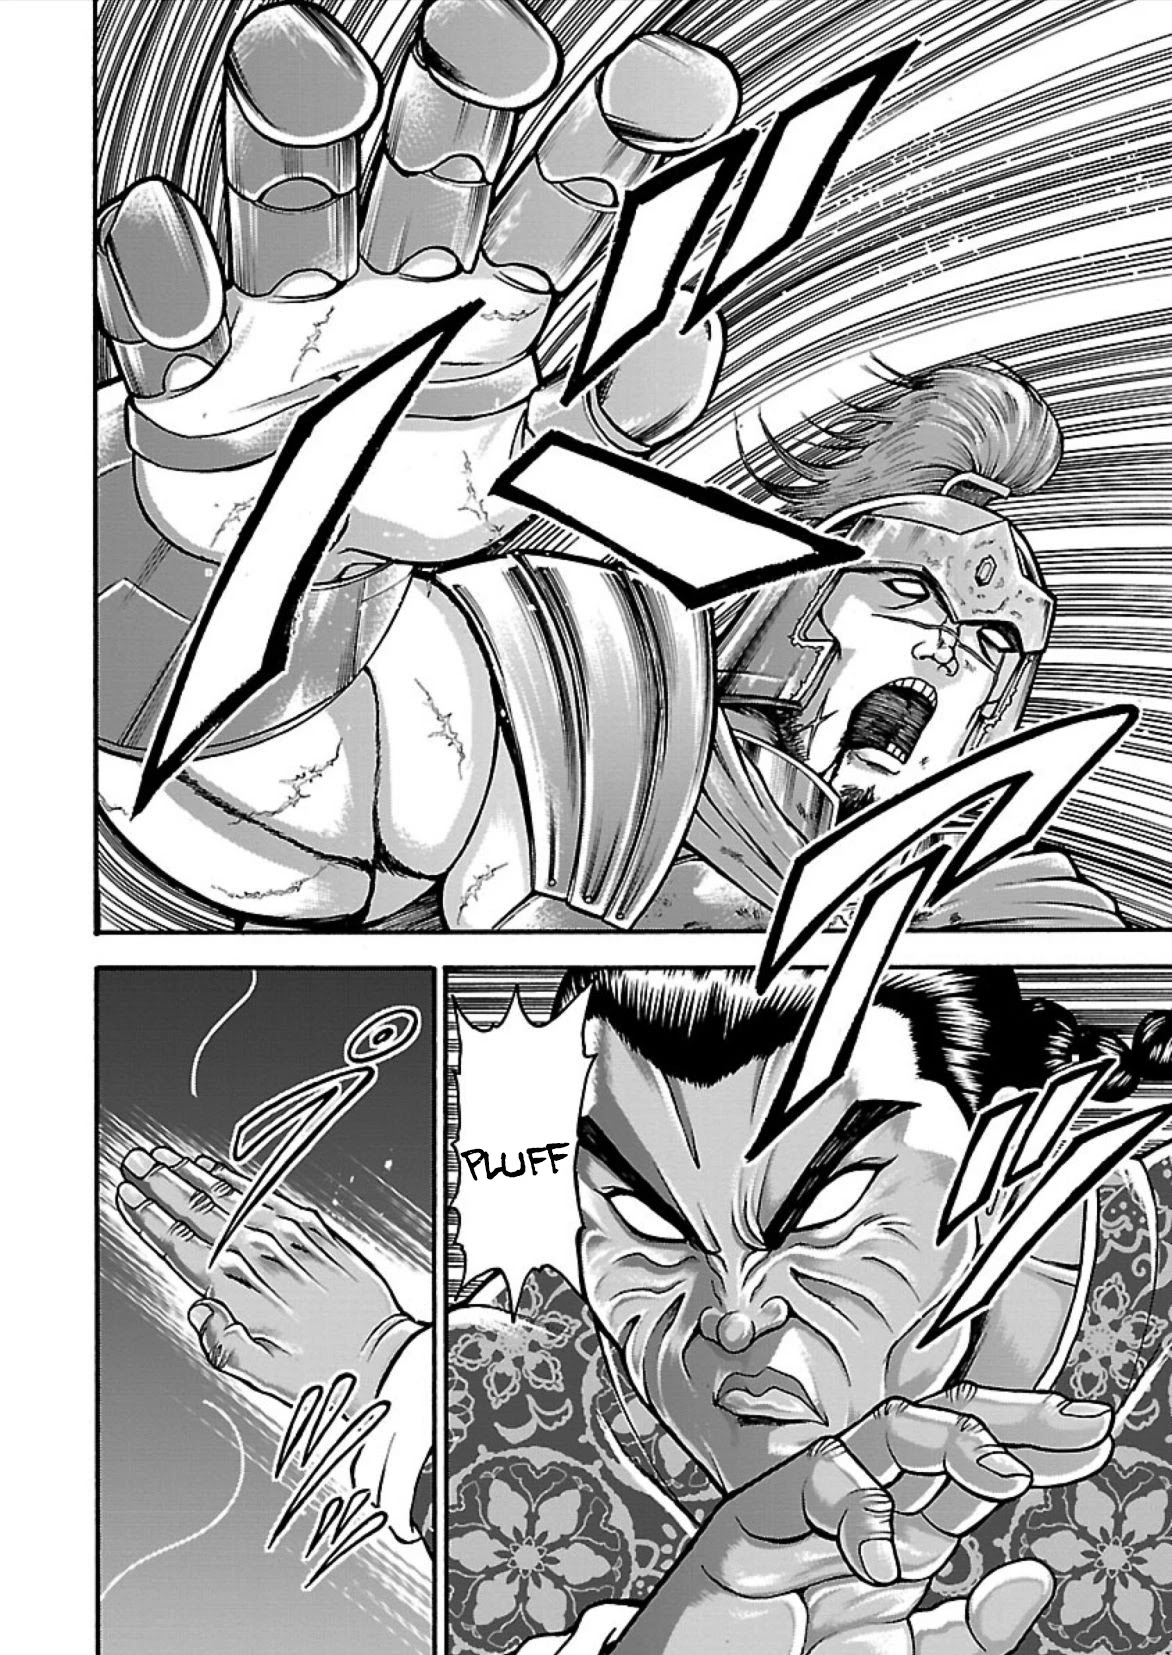 Baki Side Story - Retsu Kaioh Doesn't Mind Even If It's In Another World - Page 4